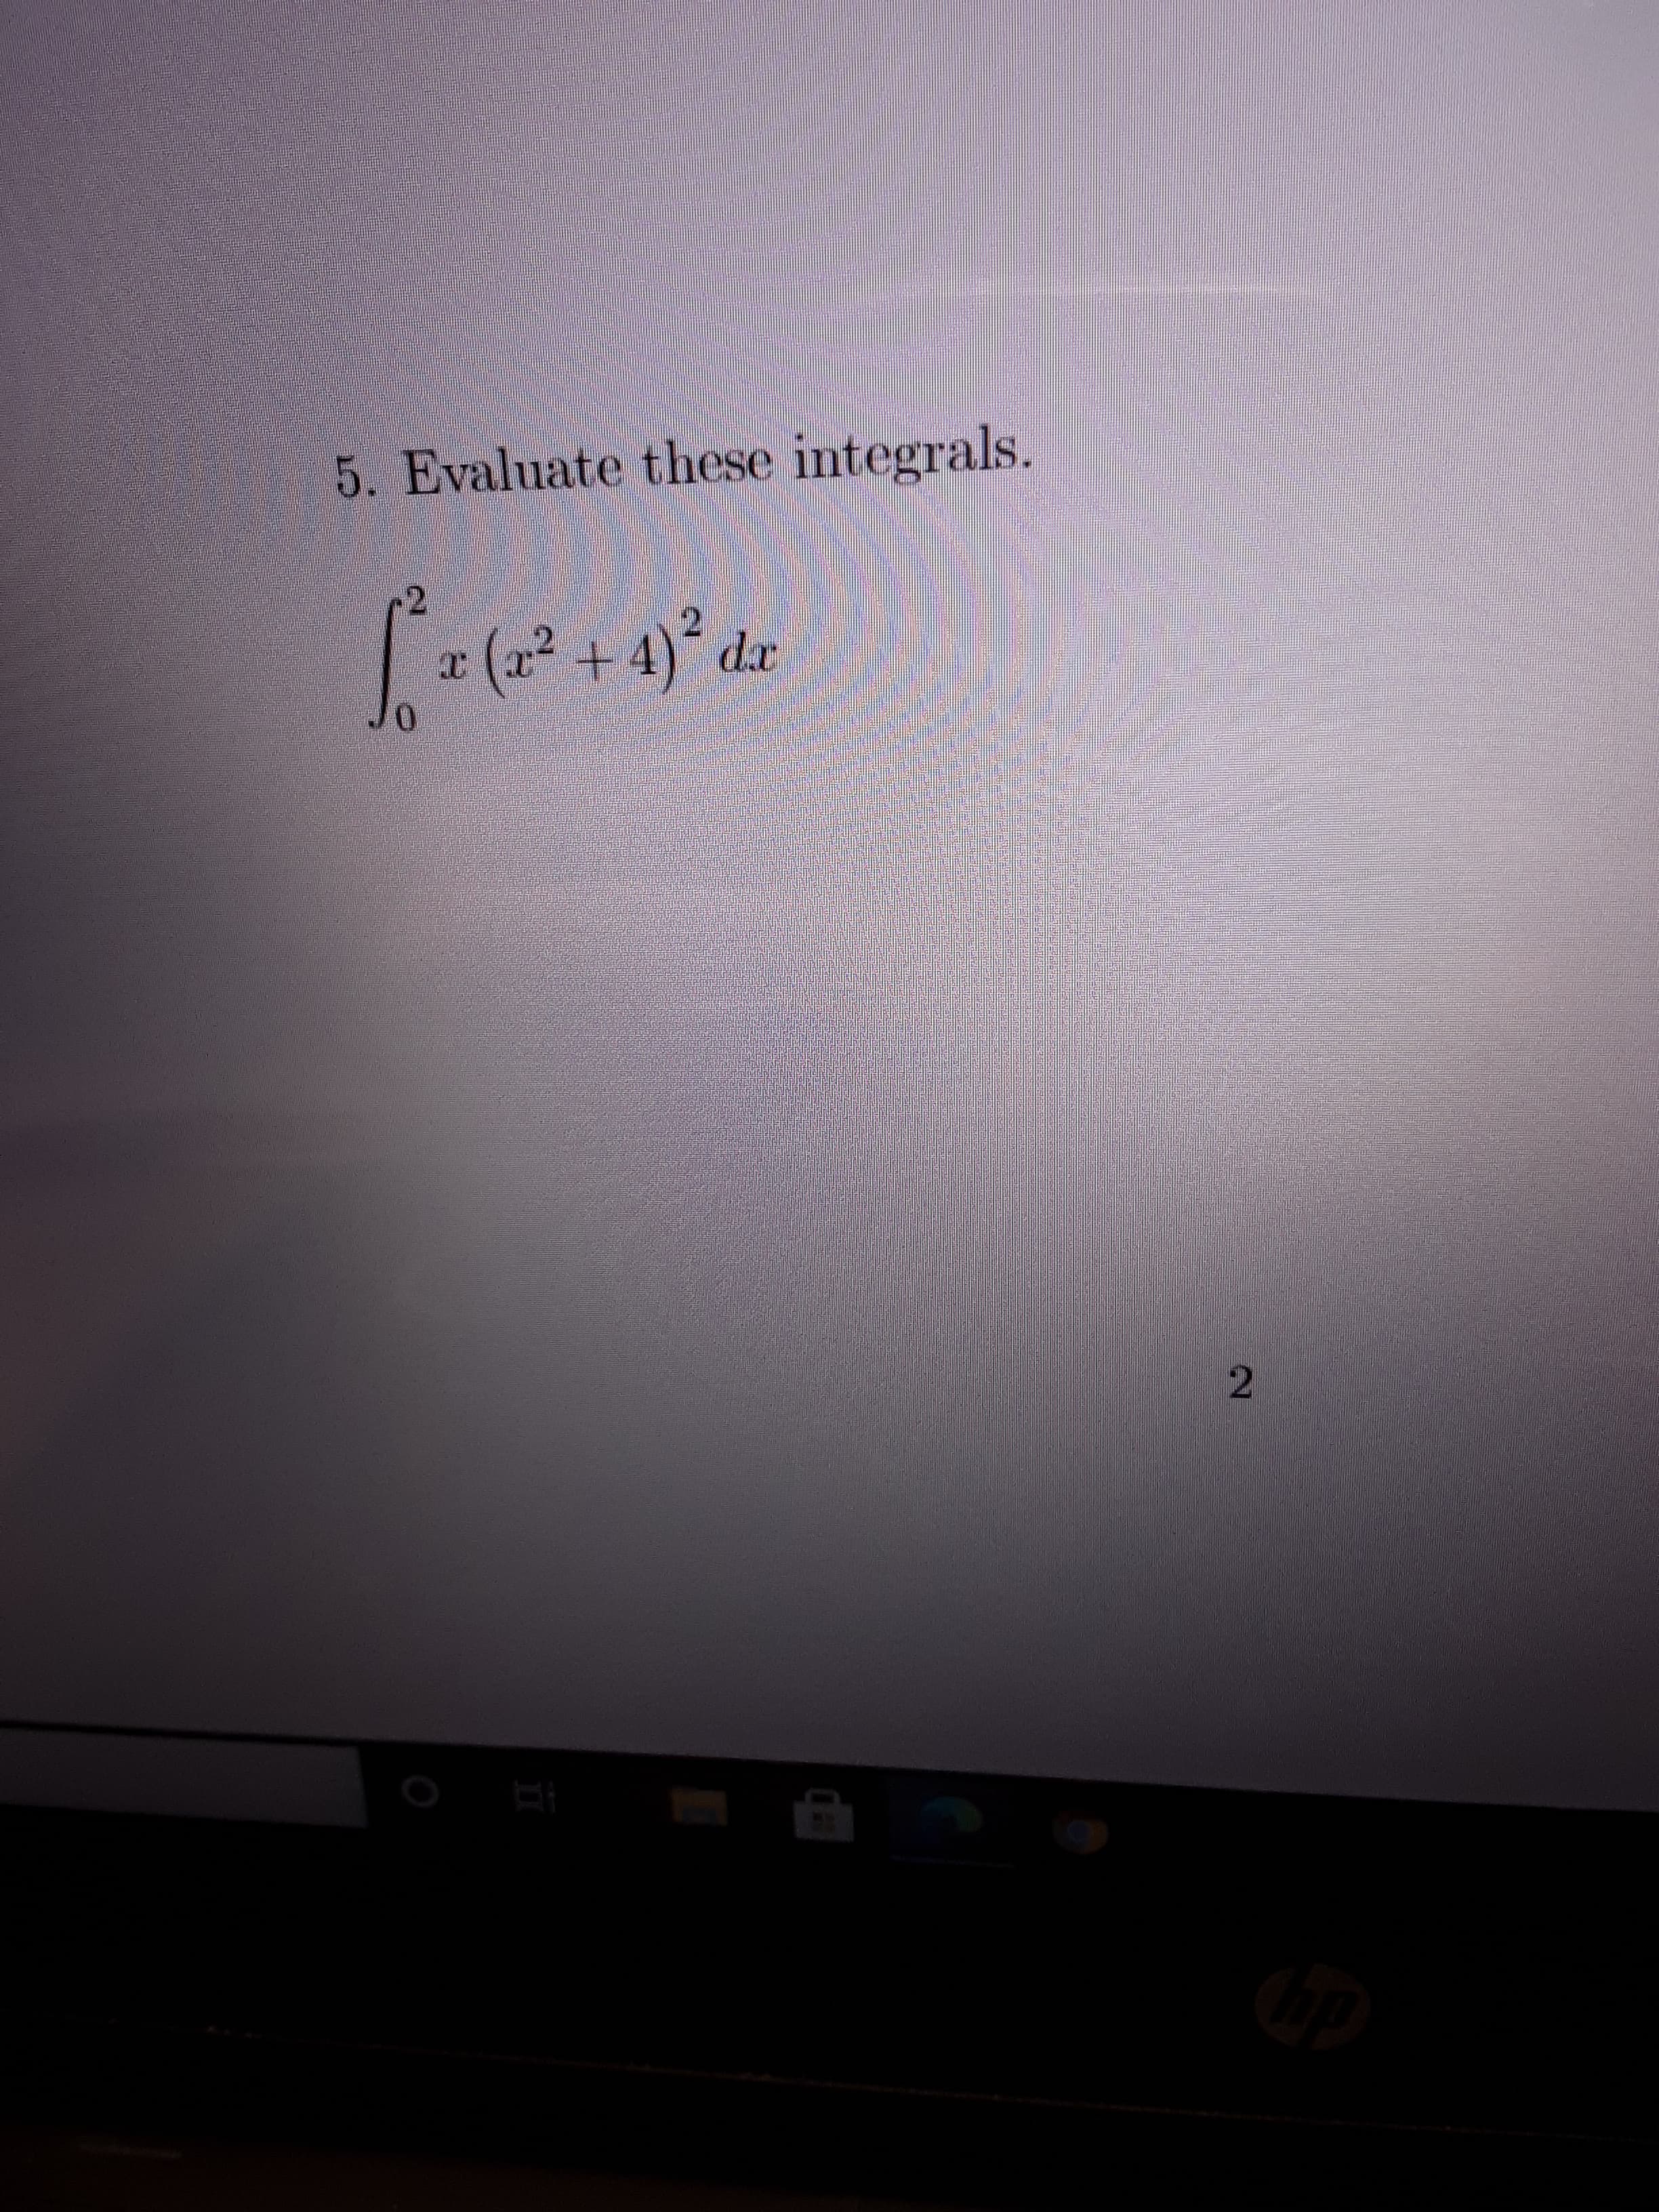 5. Evaluate these integrals.
(2² + 4)*
d.x
